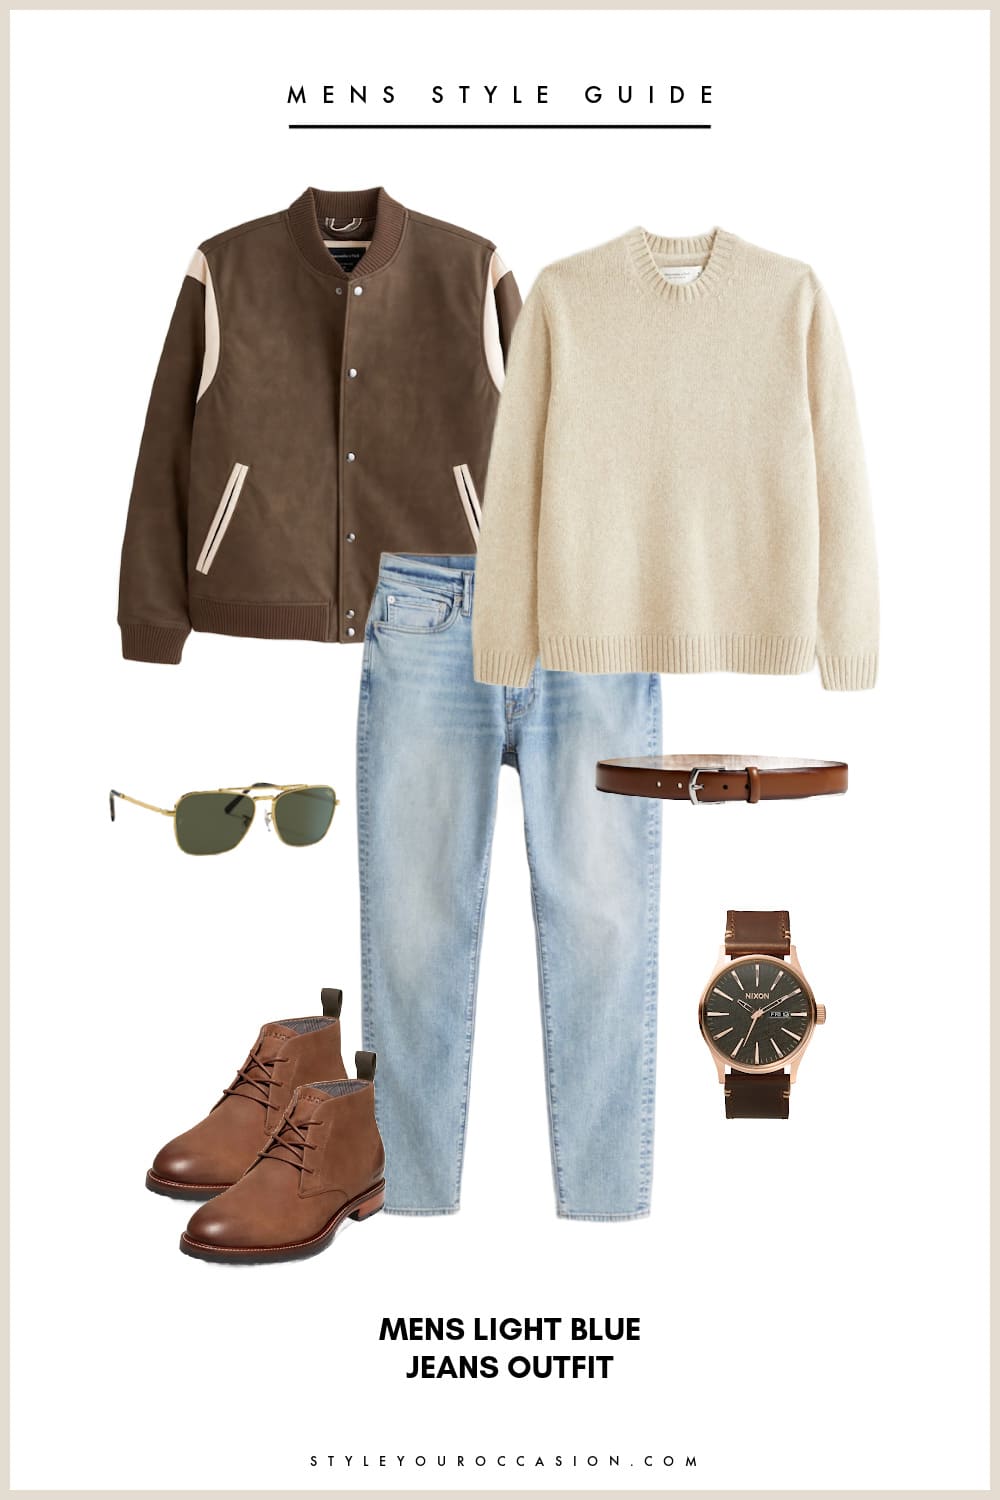 collage of a mens outfit with a brown bomber jacket, cream knit sweater, light blue jeans, brown boots, and a brown belt